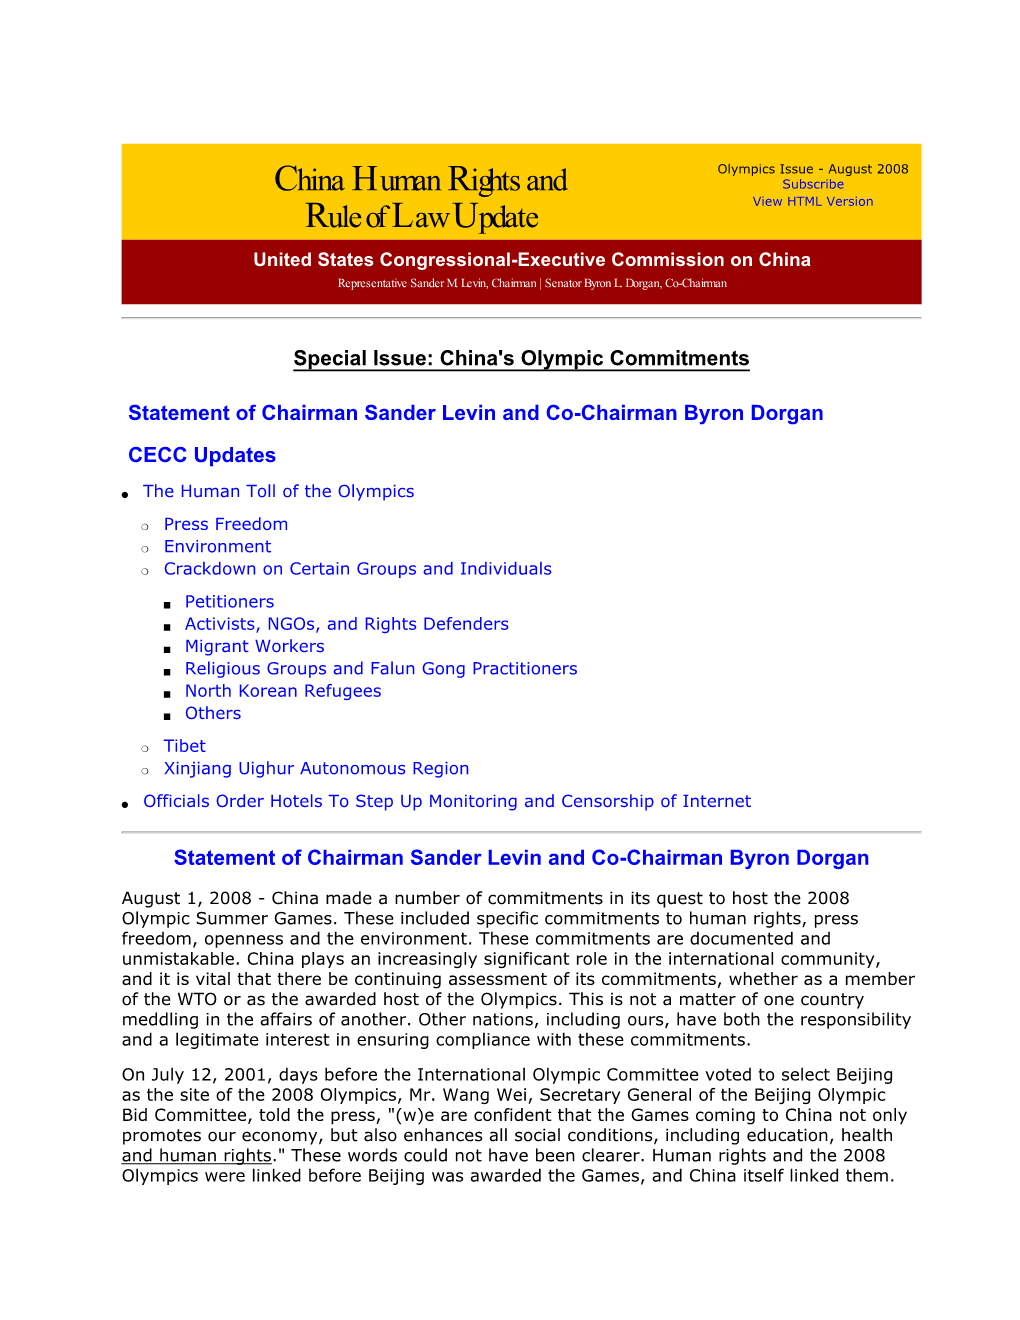 China Human Rights and Rule of Law Update